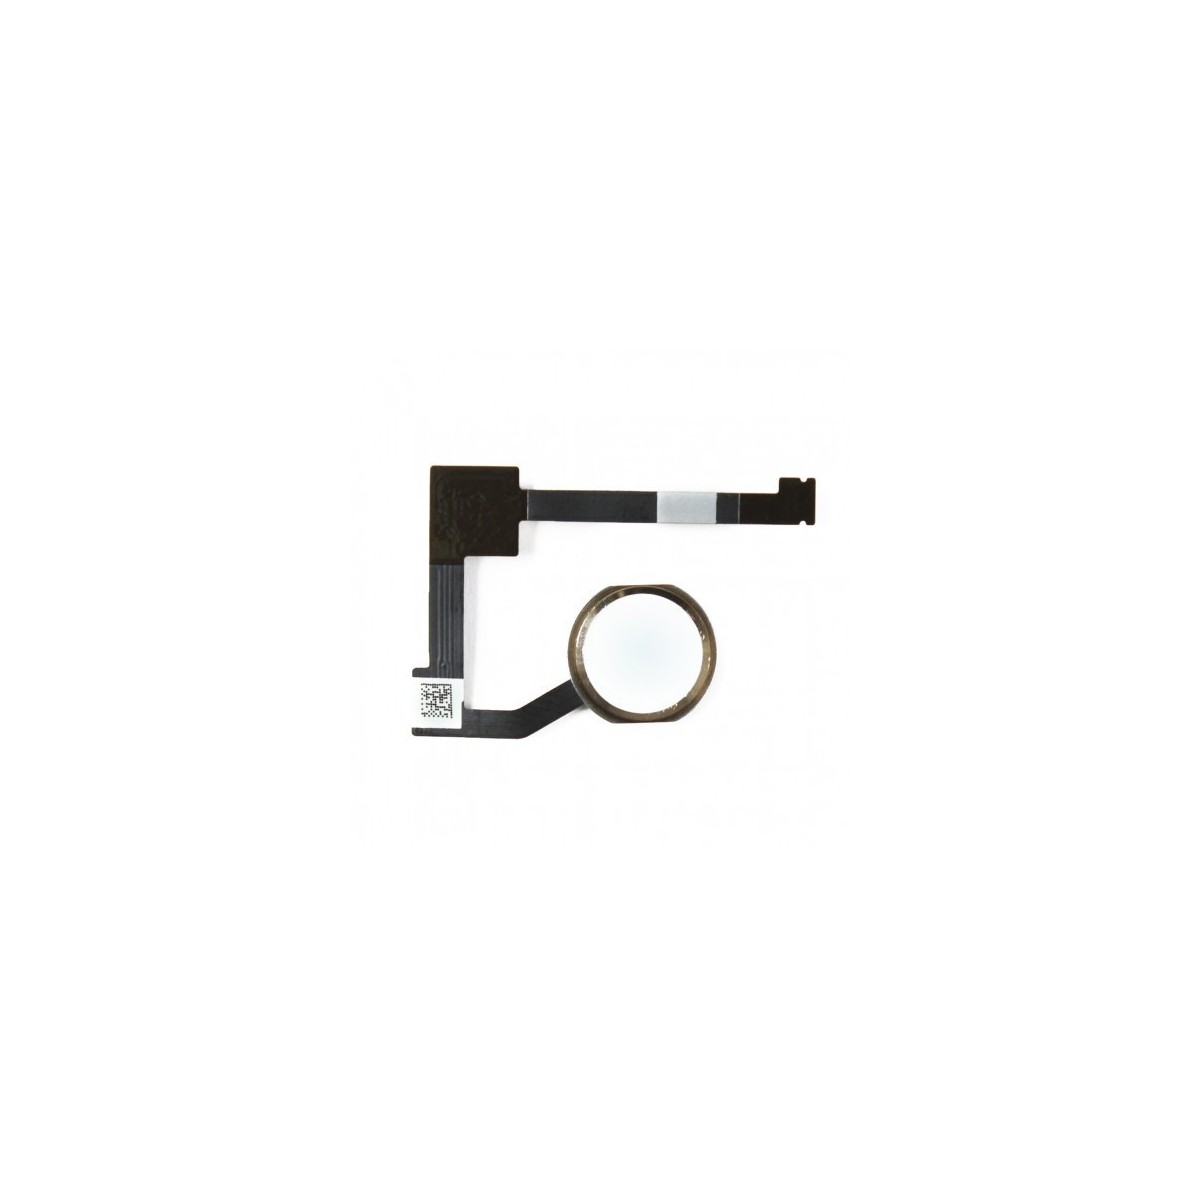 Bouton home + nappe iPad Air 2 Or